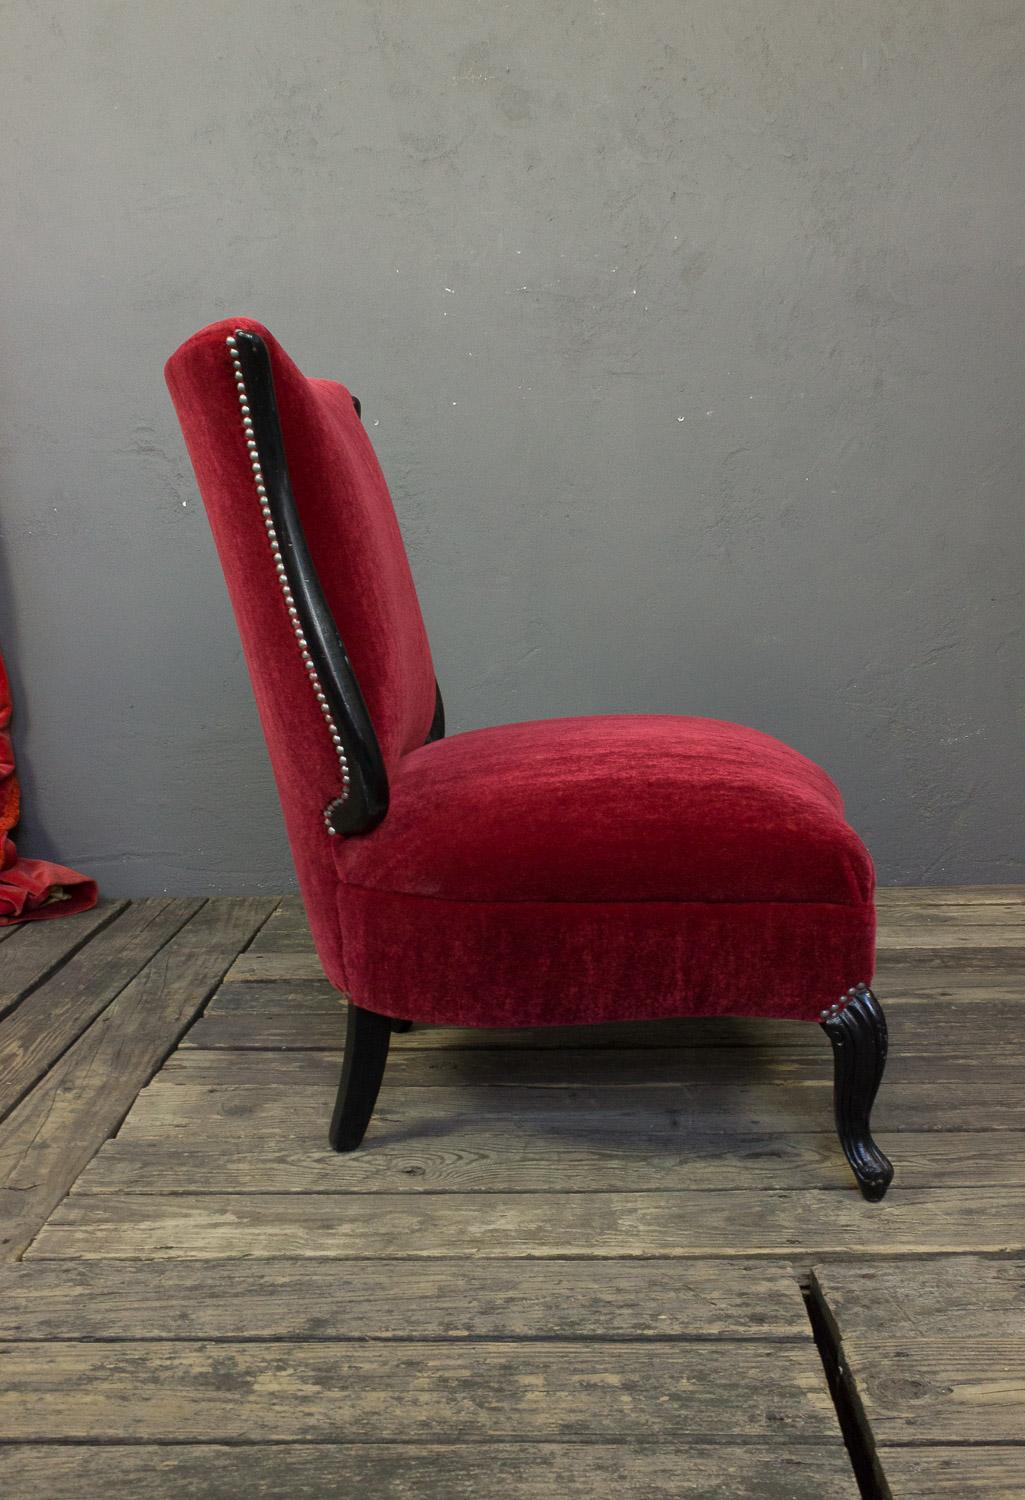 Mid-20th Century American Mid-Century Scrolled Leg Slipper Chair For Sale